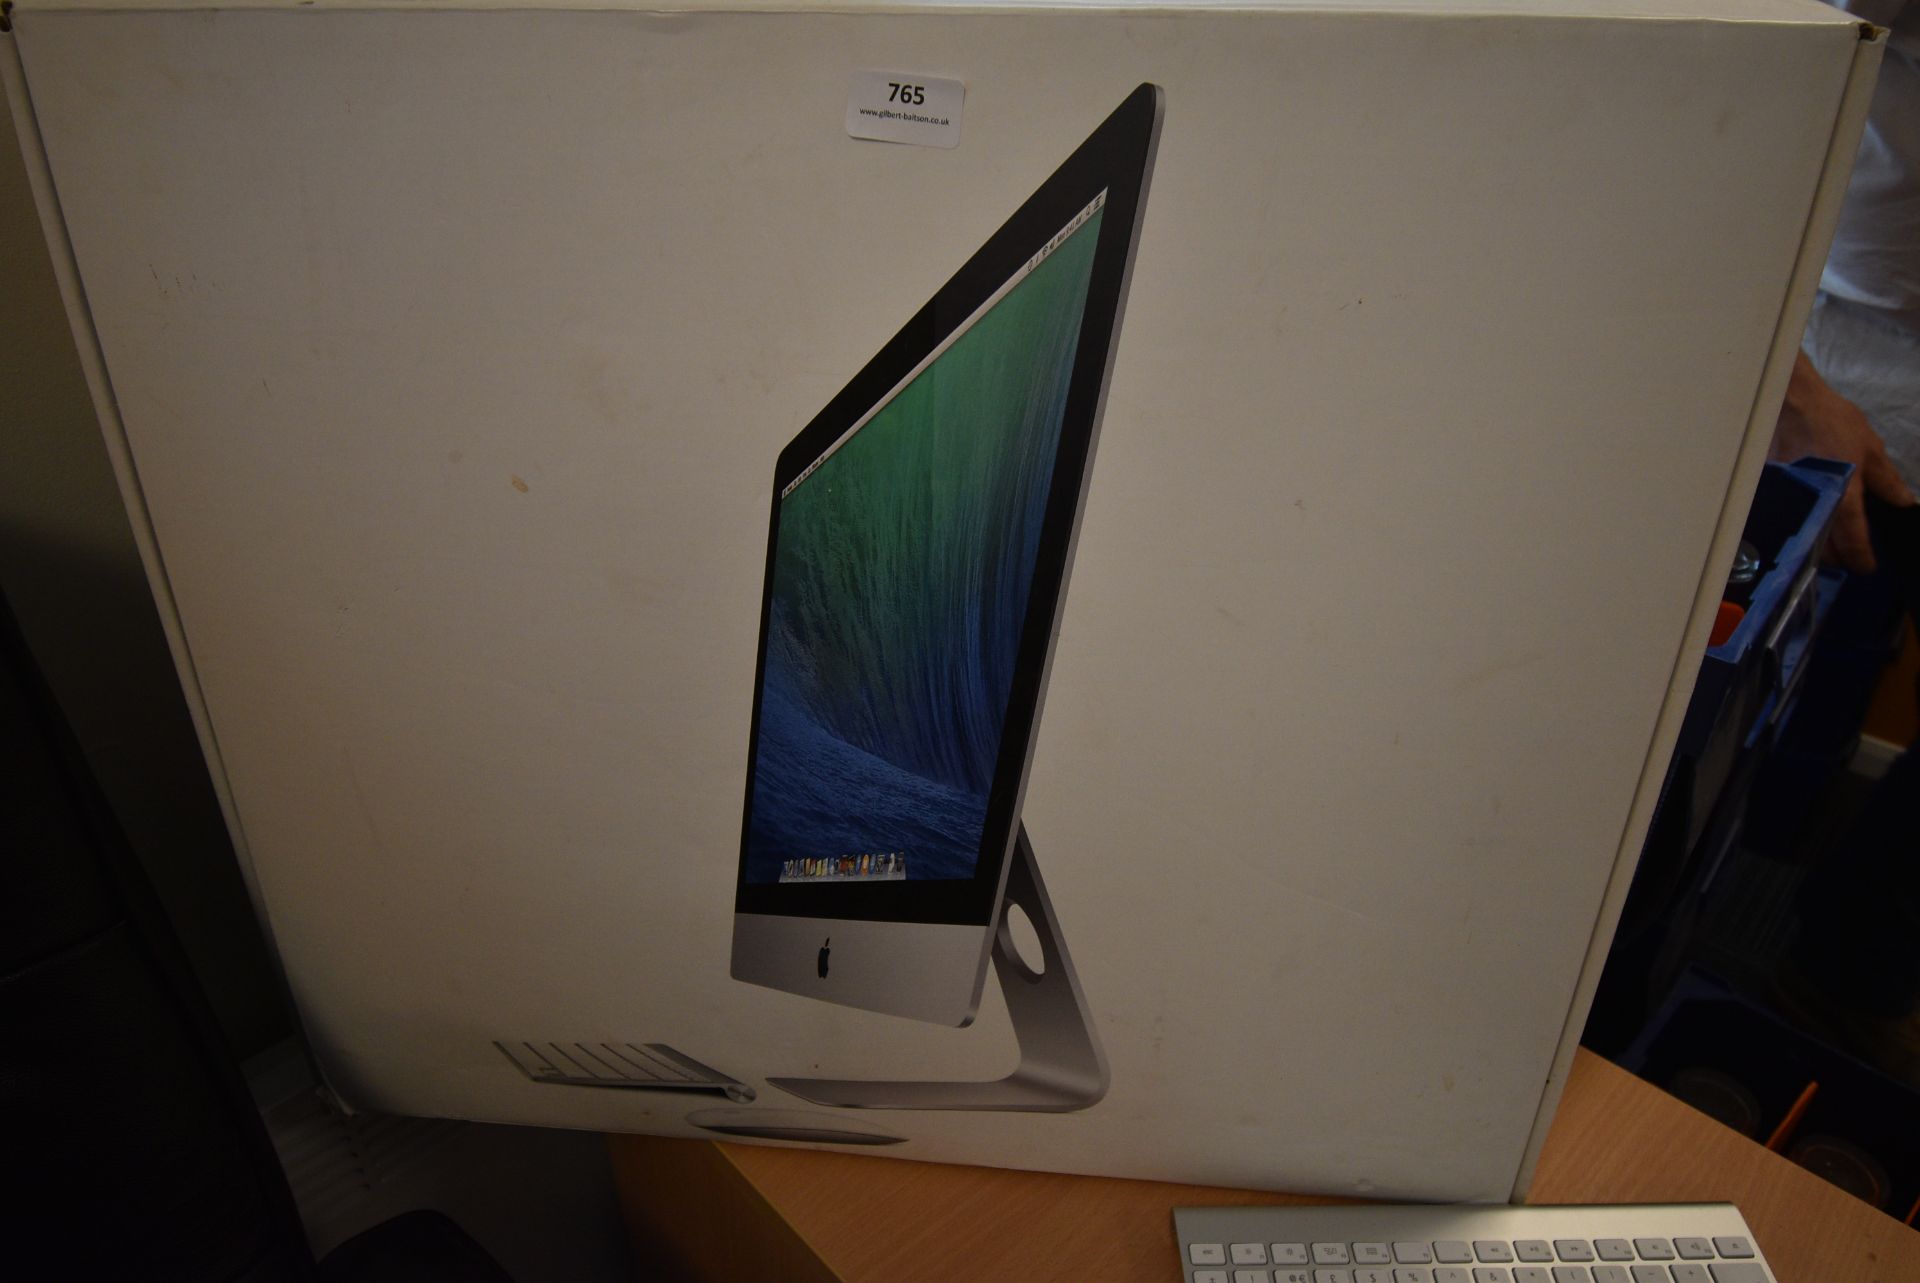 *iMac 21” LED Backlit Display, Keyboard, and Accessories